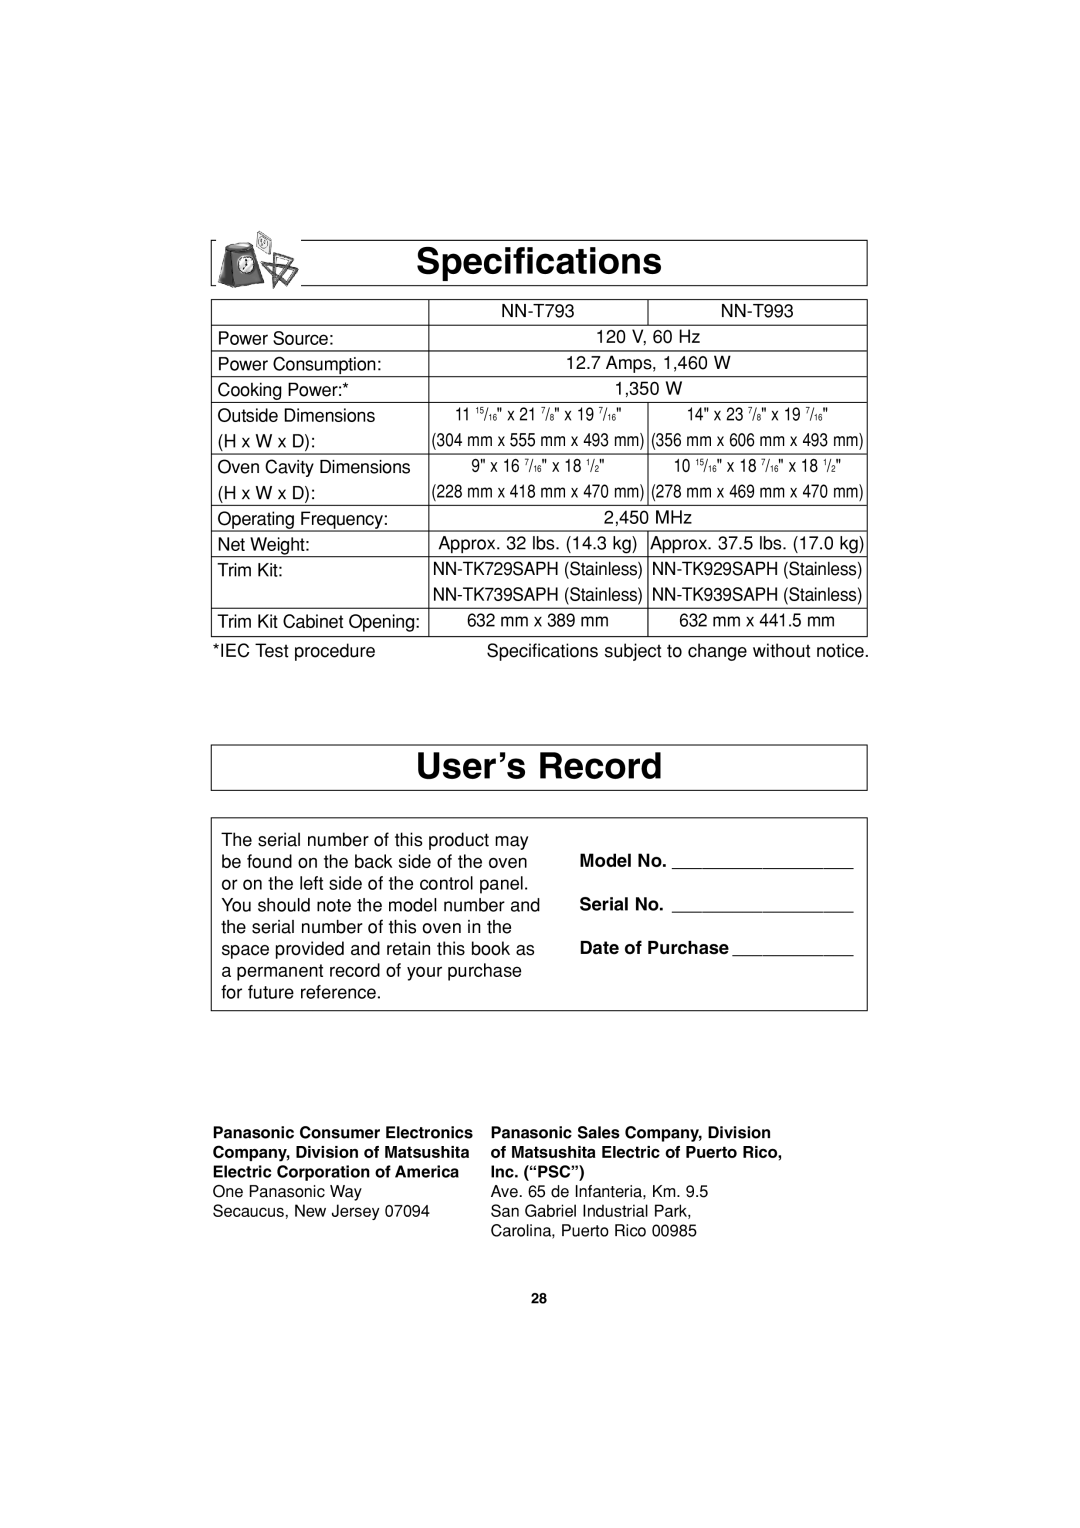 Panasonic NN-T793, NN-T993 operating instructions Specifications, User’s Record, Model No, Serial No, Date of Purchase 